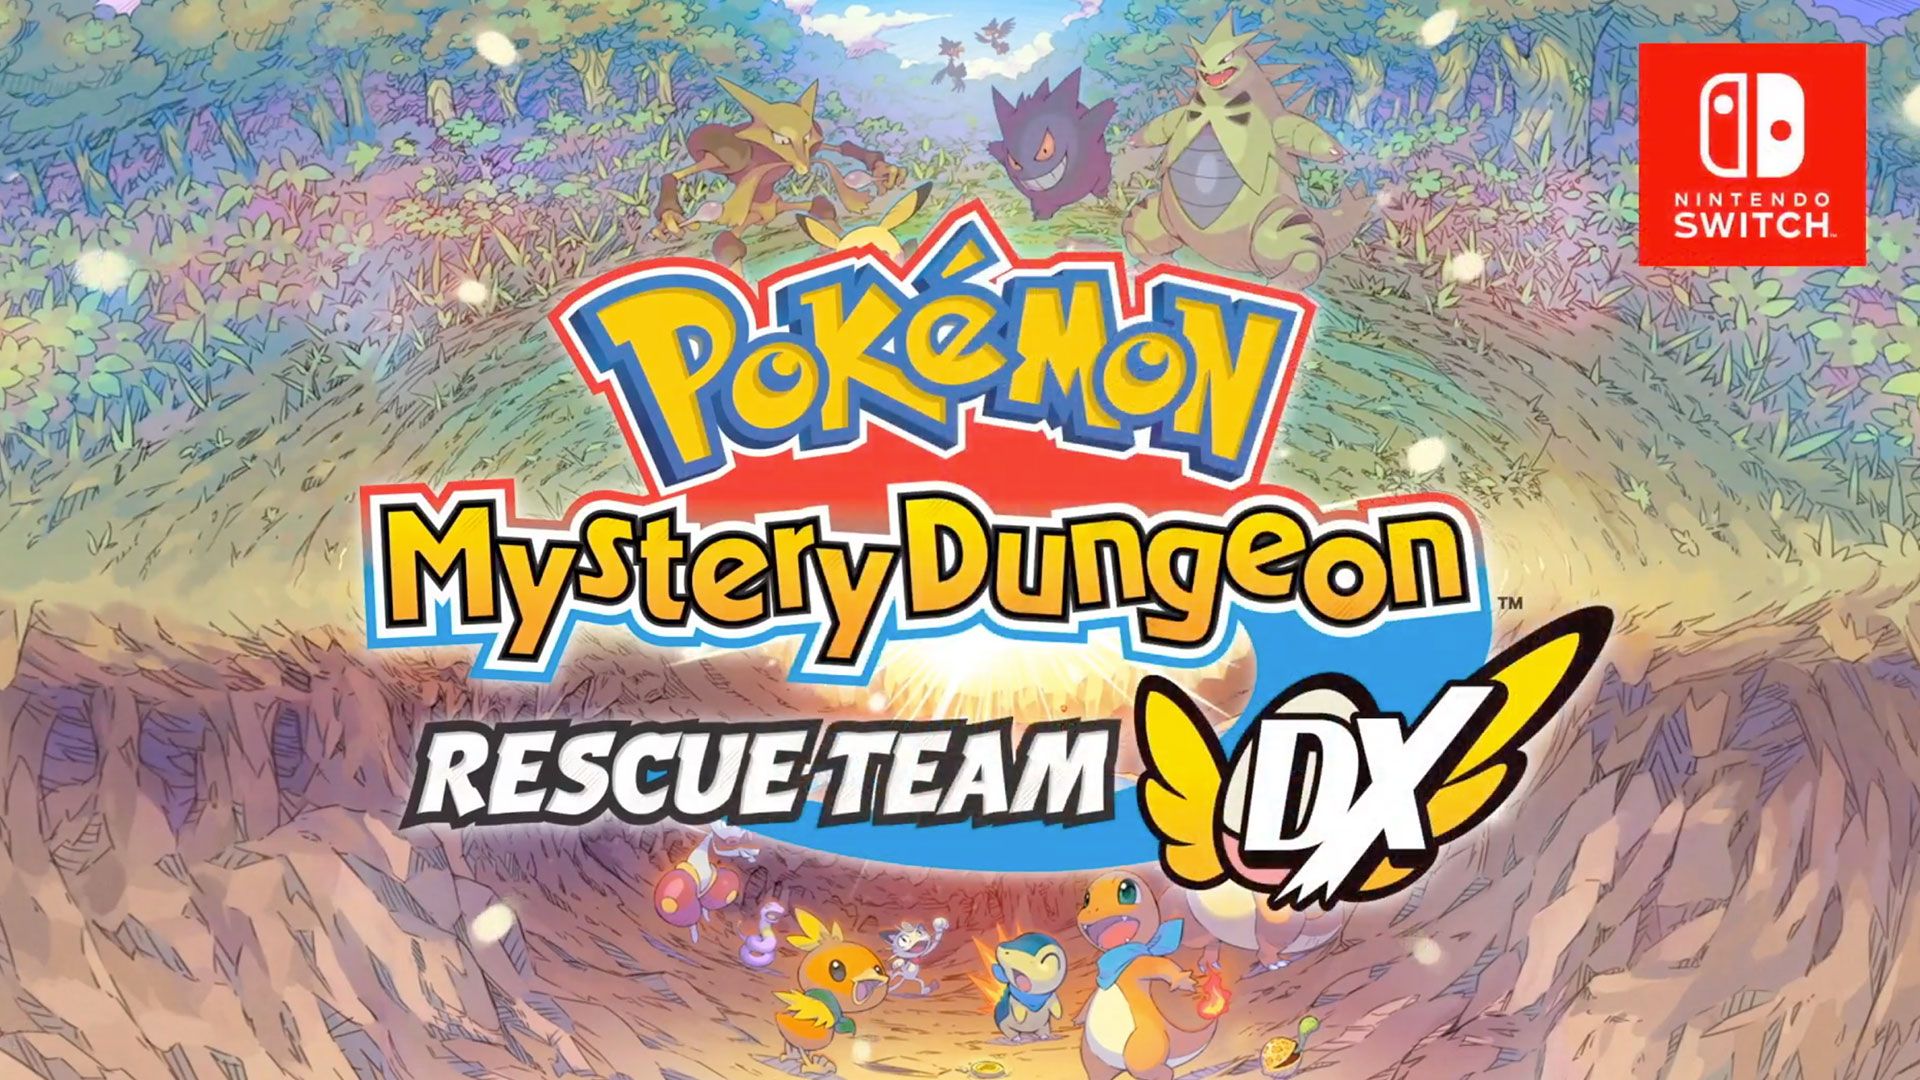 Pokemon Mystery Dungeon: Rescue Team DX is bringing the 2006